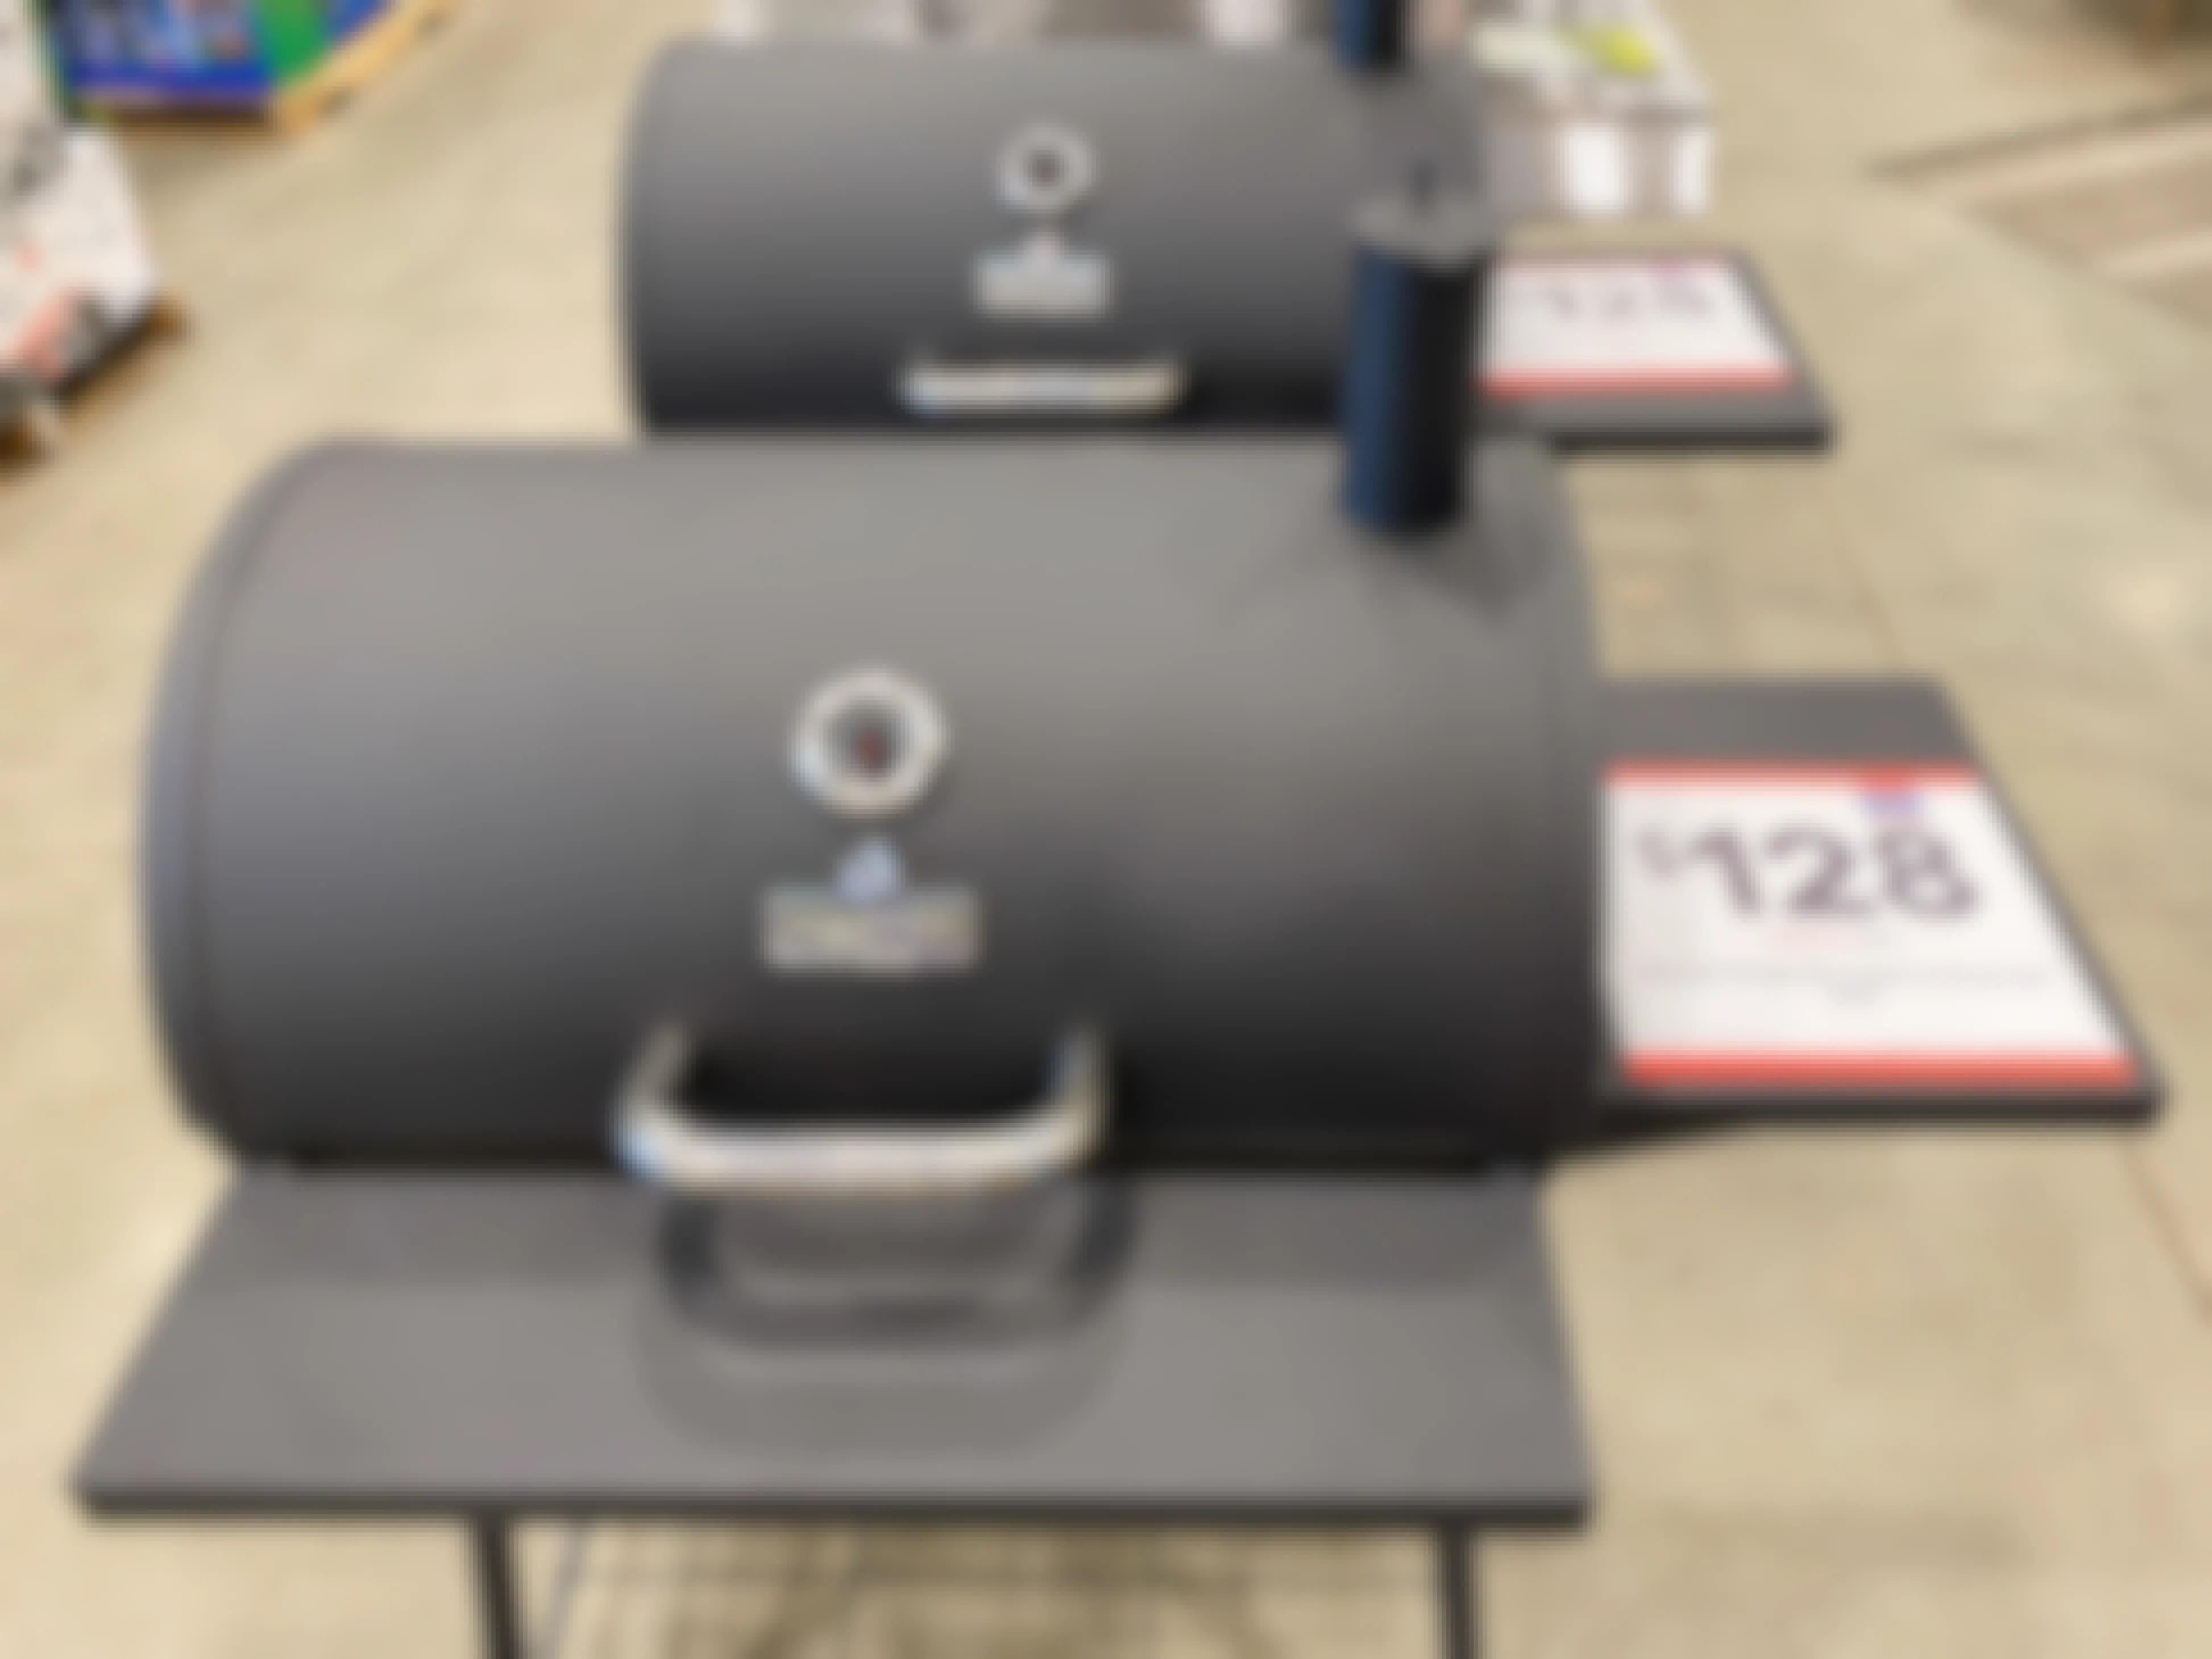 close shot of charcoal grill on display at Lowe's